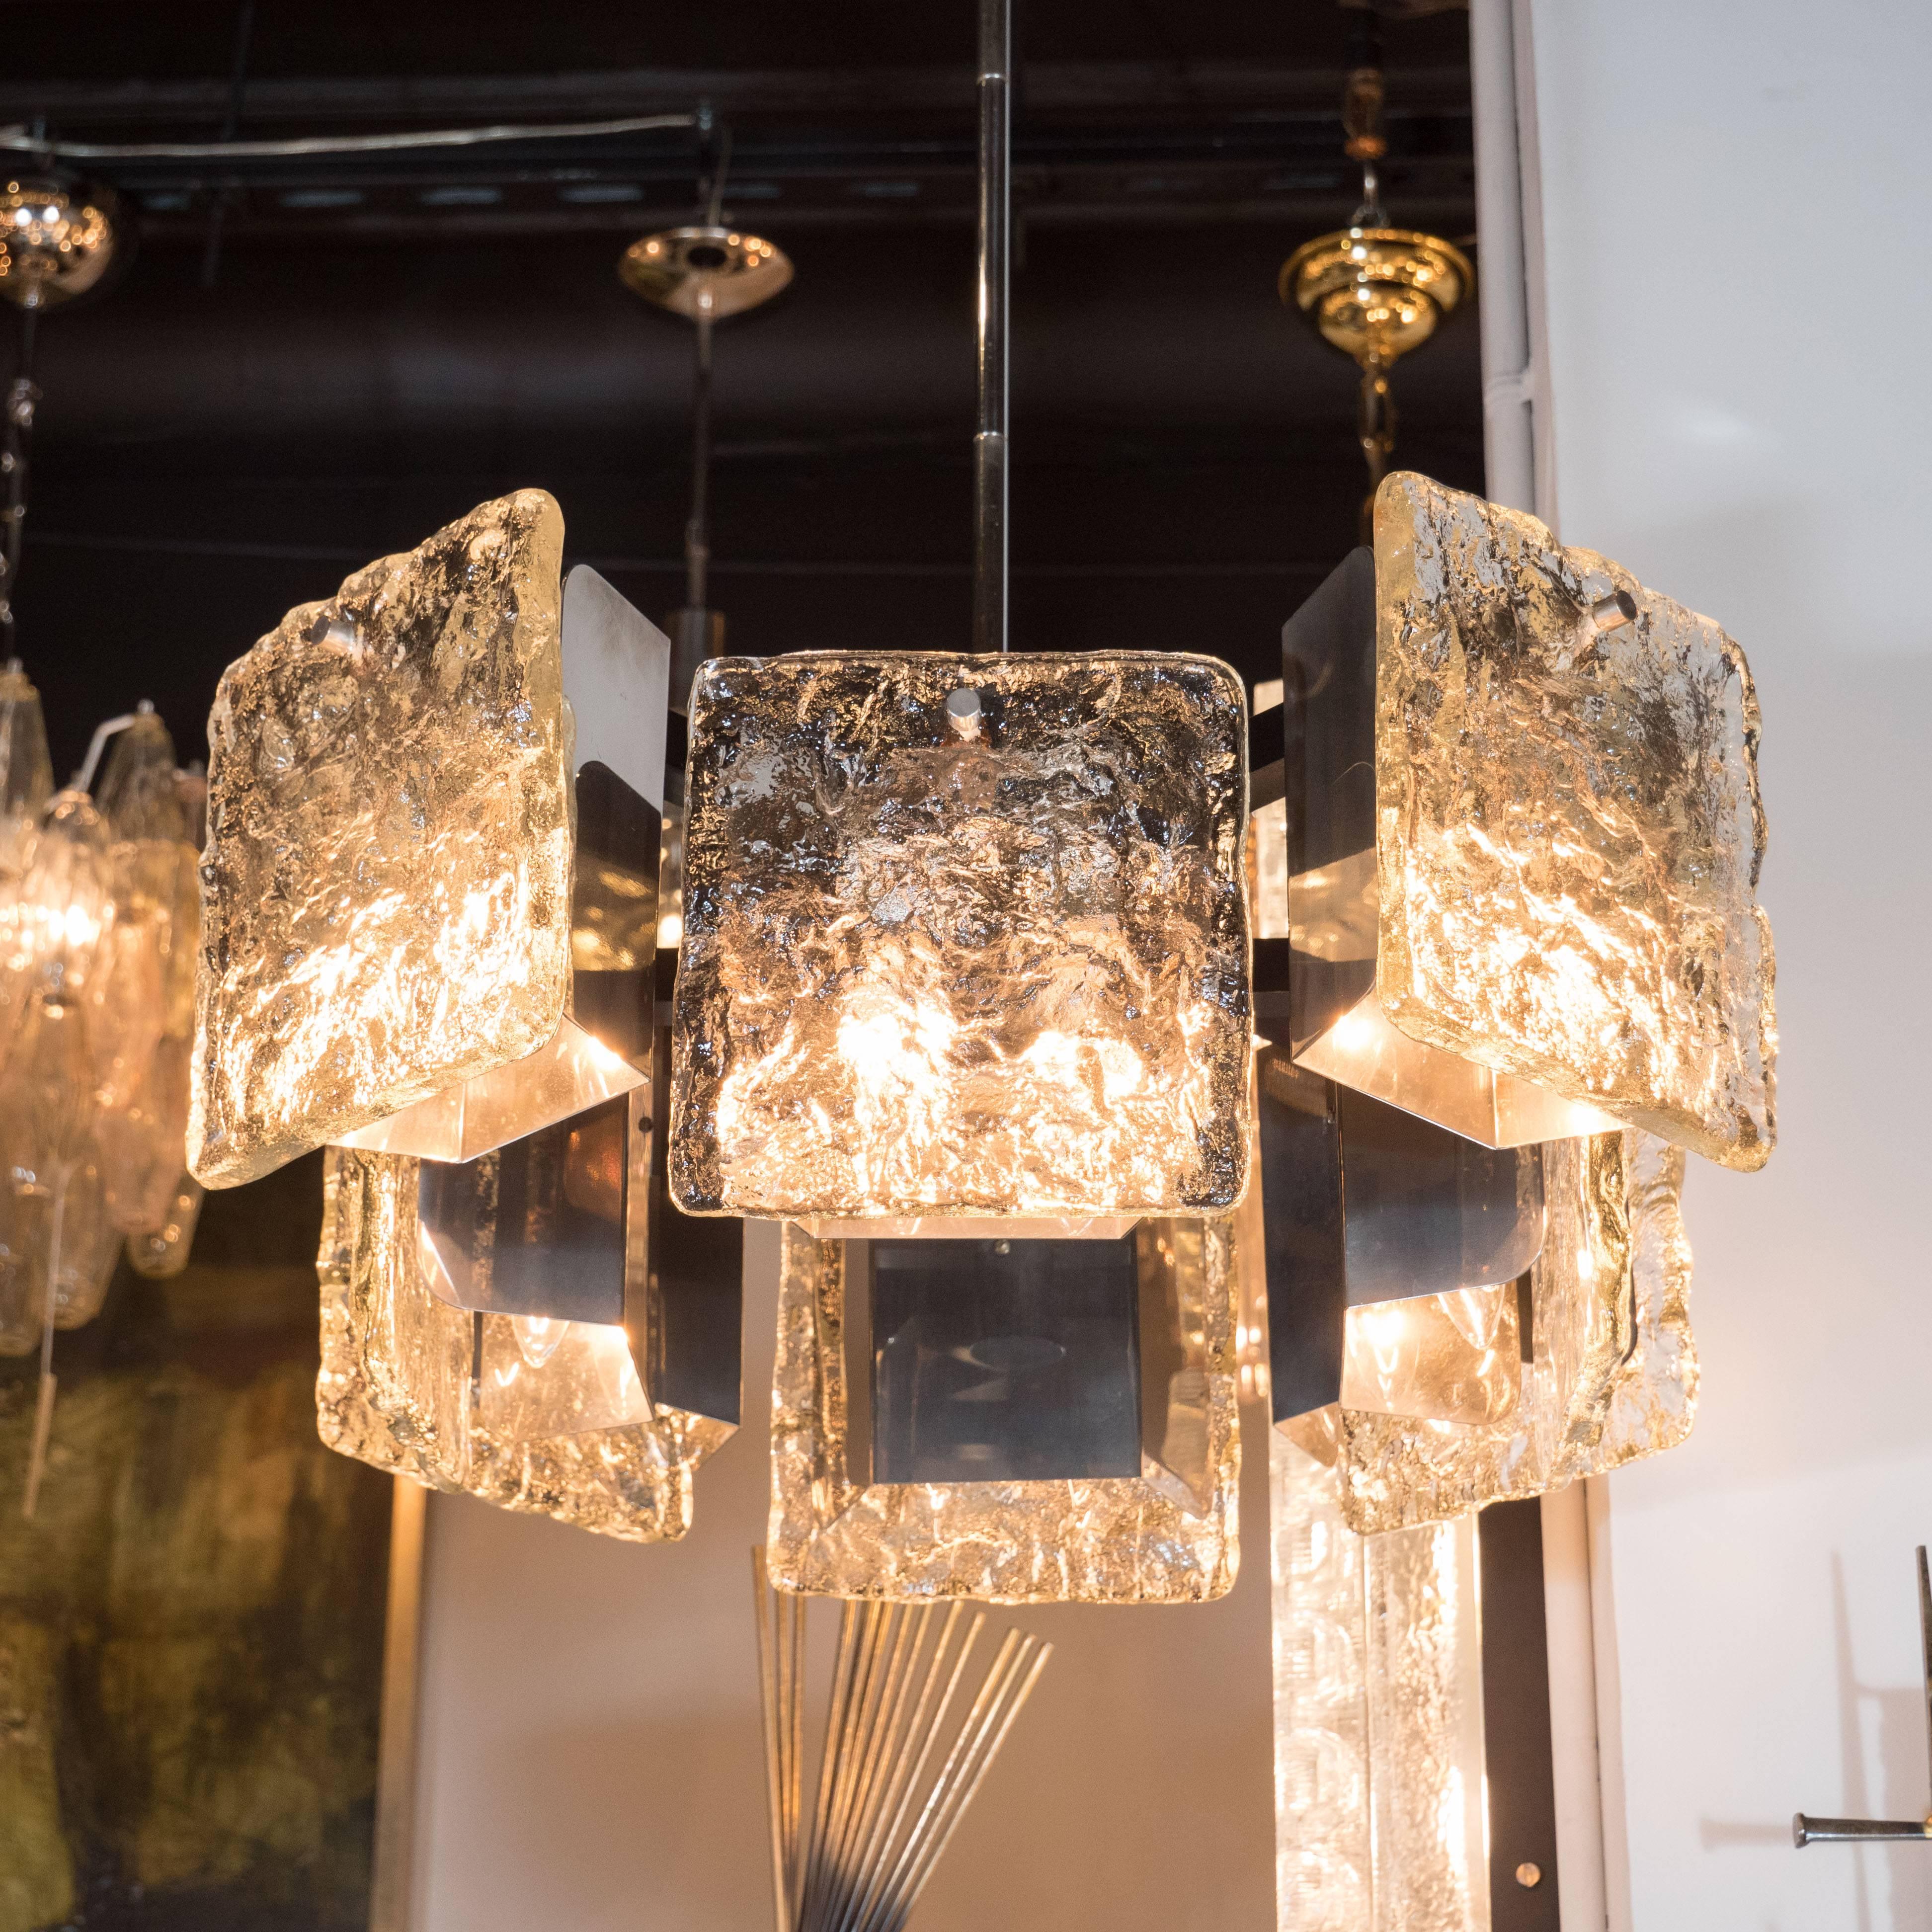 Late 20th Century Midcentury Polished Chrome Chandelier with Textured Glass Shades by Mazzega